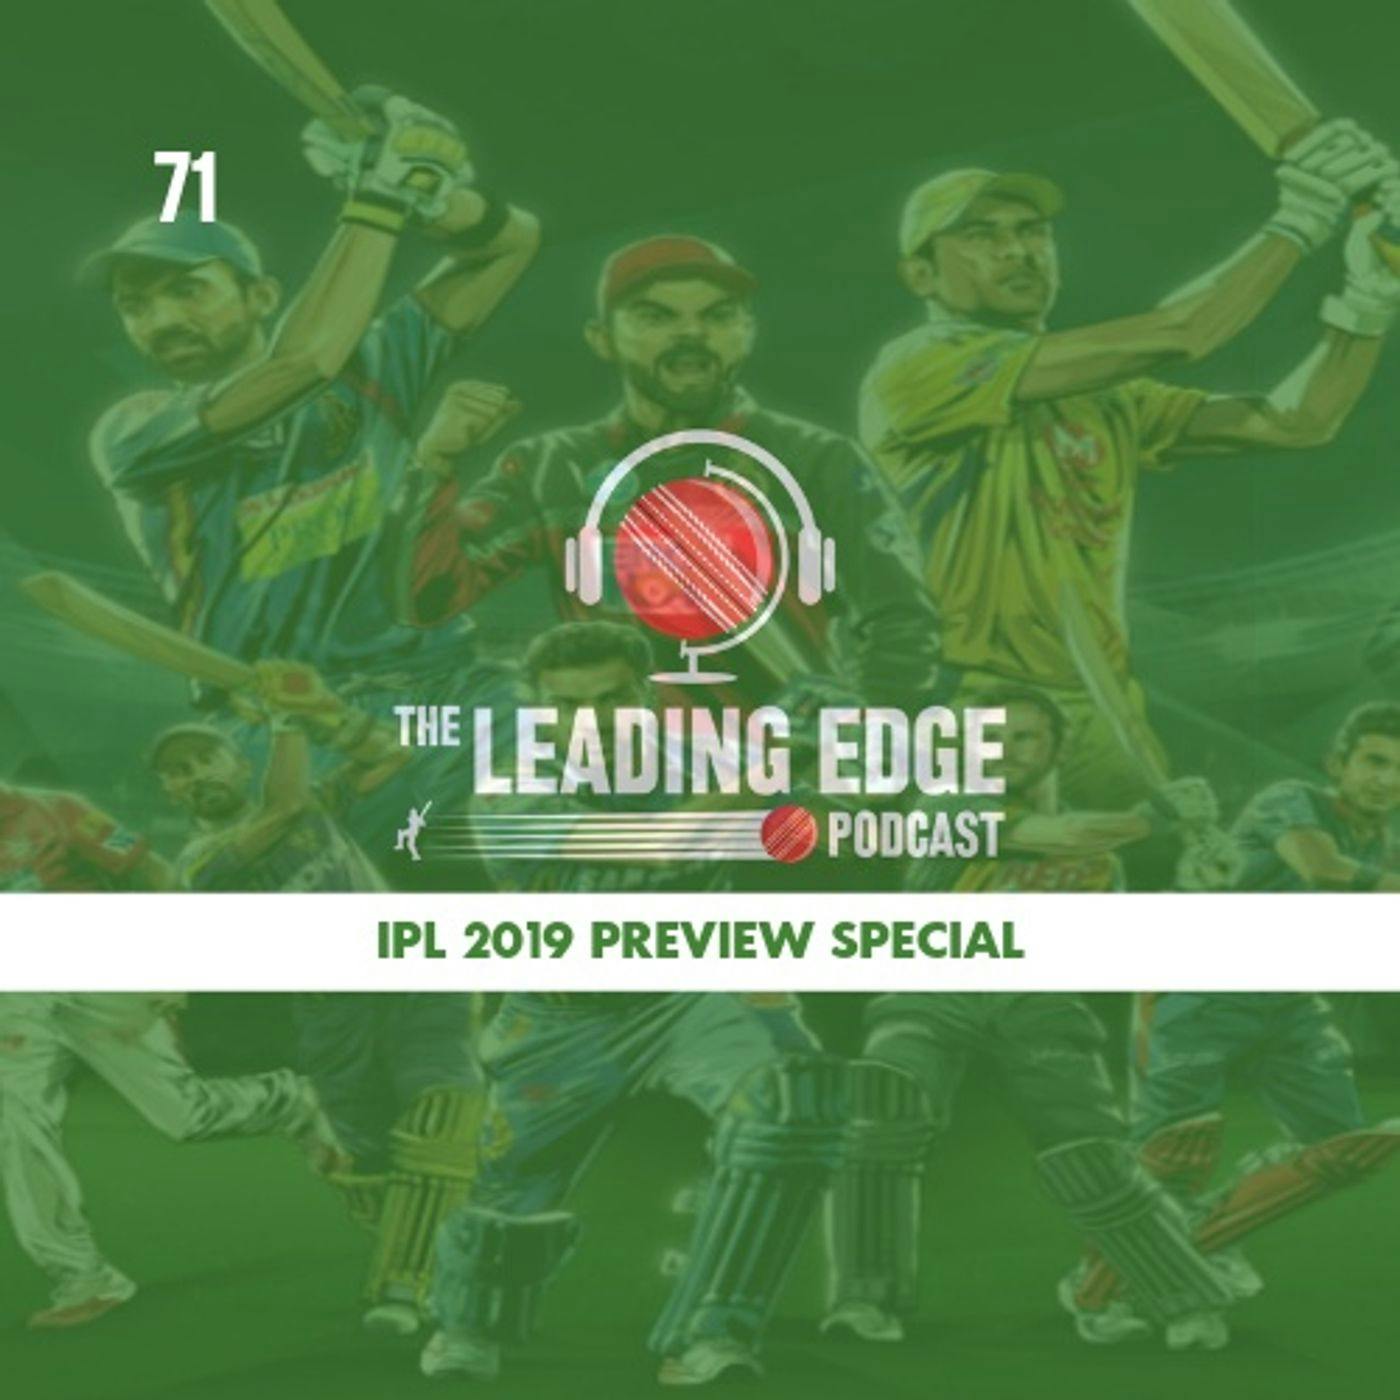 IPL 2019 PREVIEW SPECIAL | Leading Edge Cricket Podcast Ep71